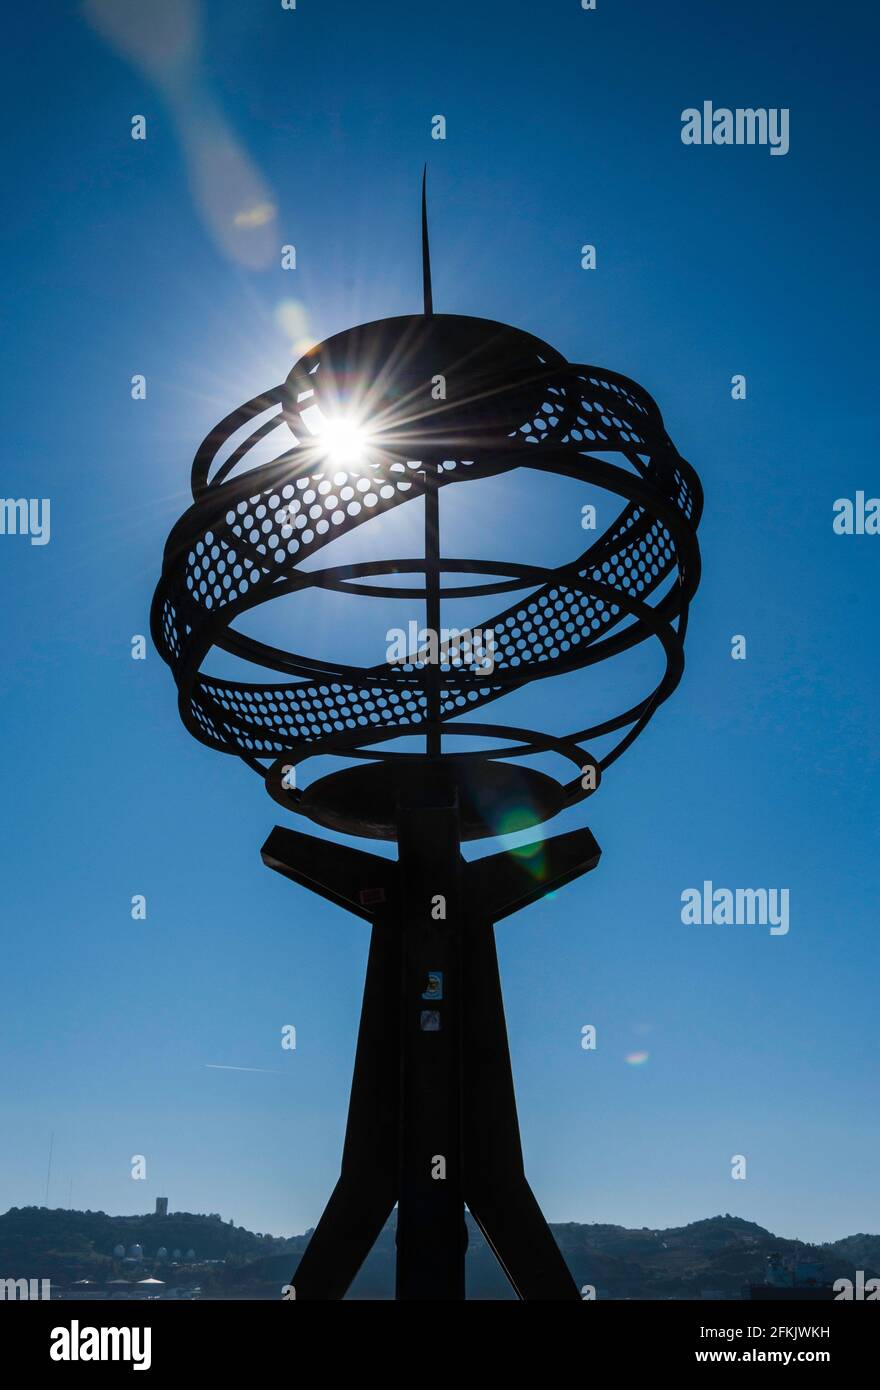 Sculpture of an armillary sphere (world machine) in the Belem district of Lisbon. Backlit photo at the blue hour Stock Photo